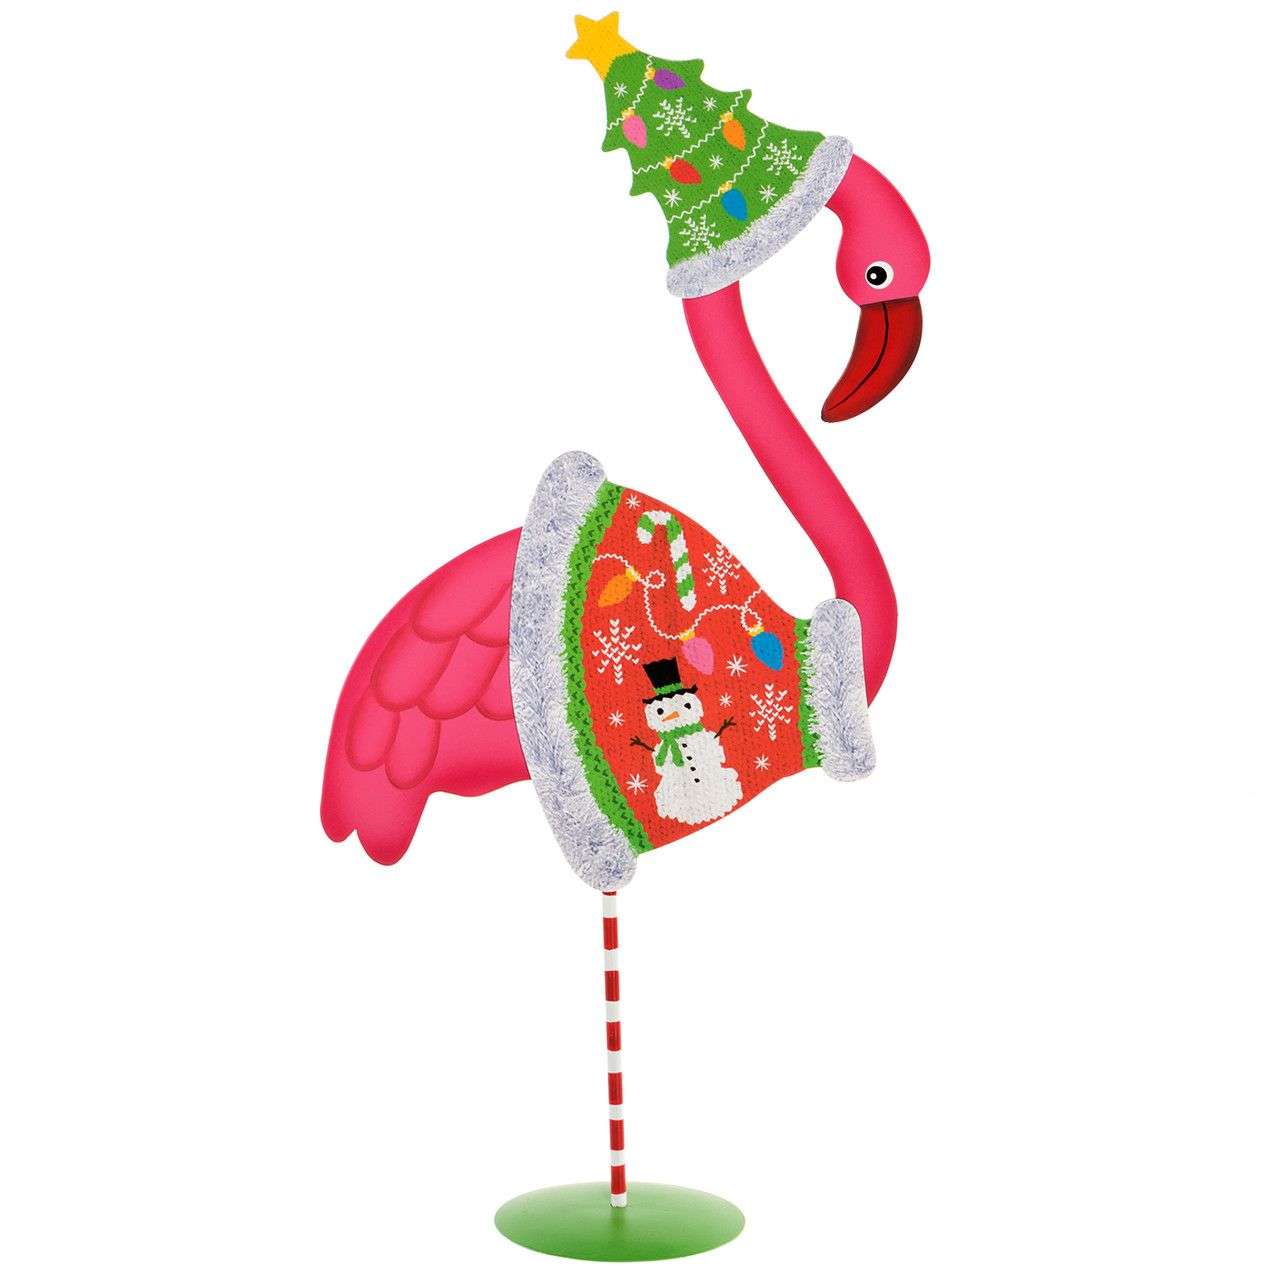 DressUp Pink Flamingo Decoration with Ugly Christmas Sweater